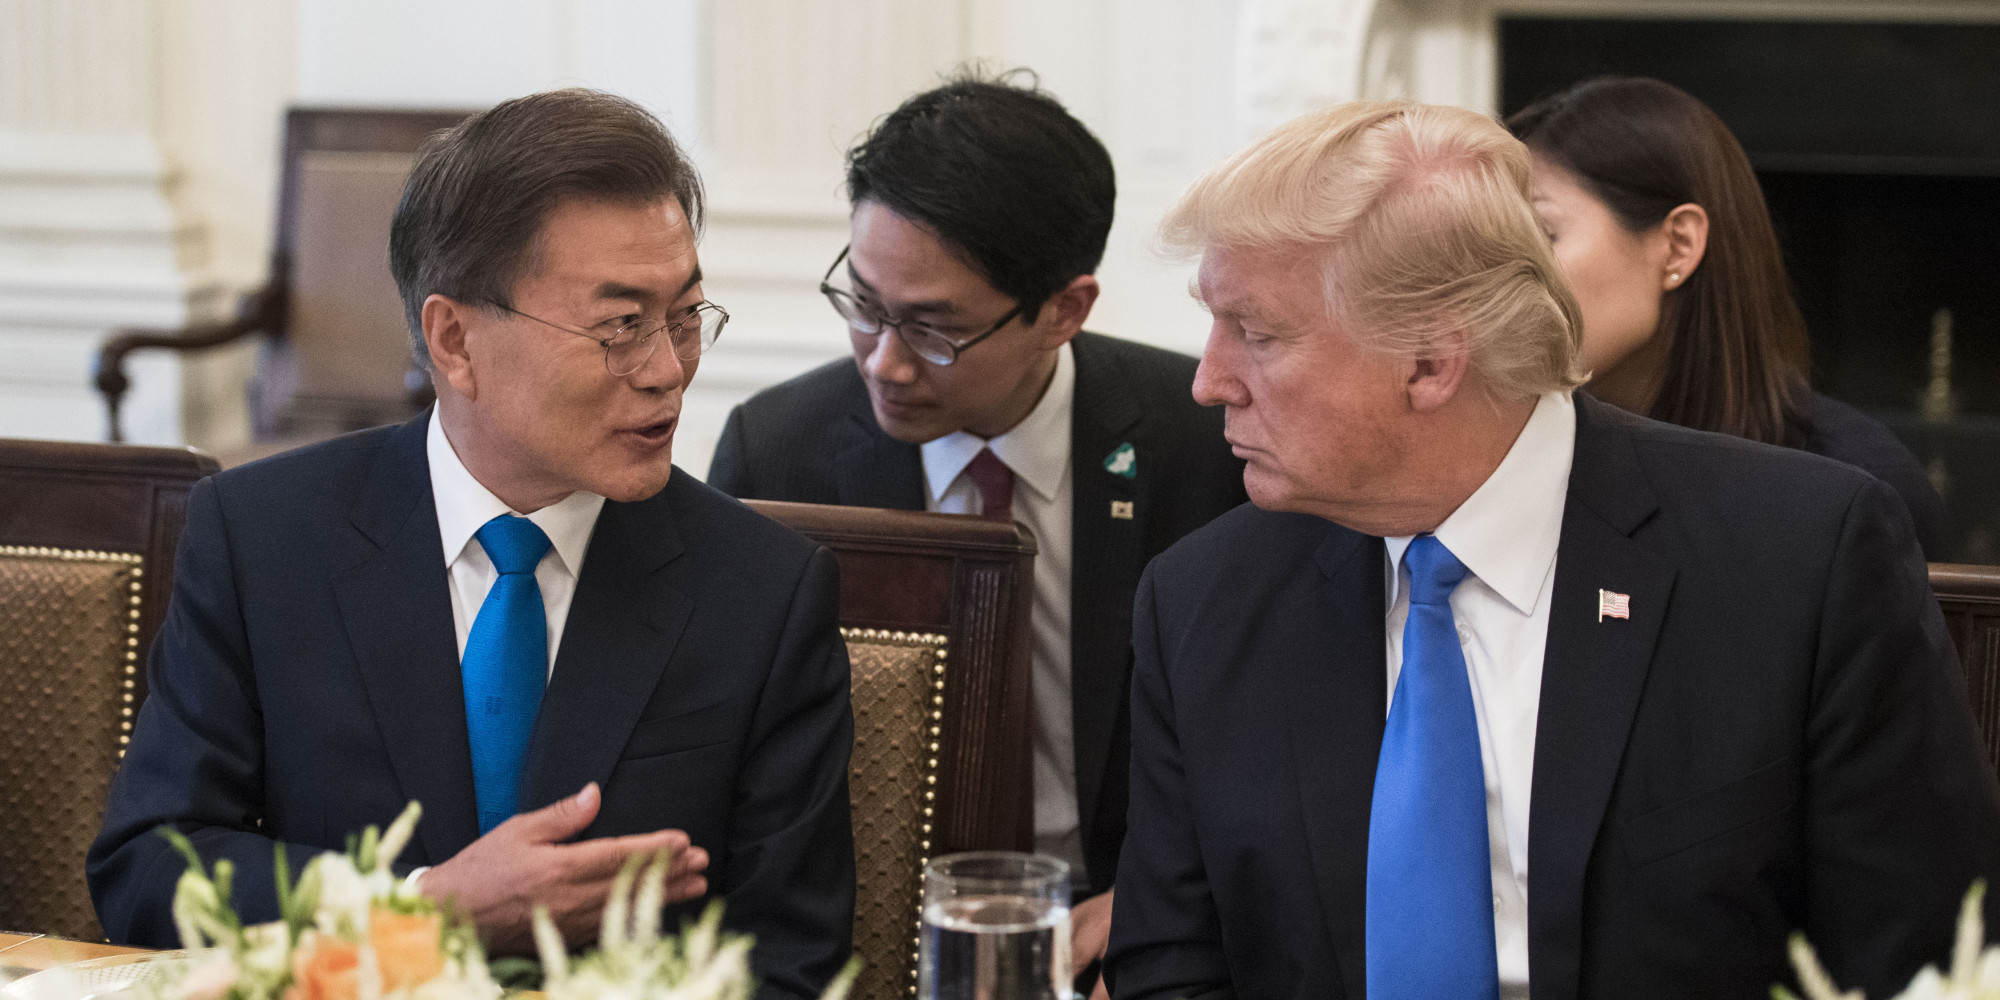 President Donald Trump and South Korean President Moon Jae-in Have Dinner At The White House